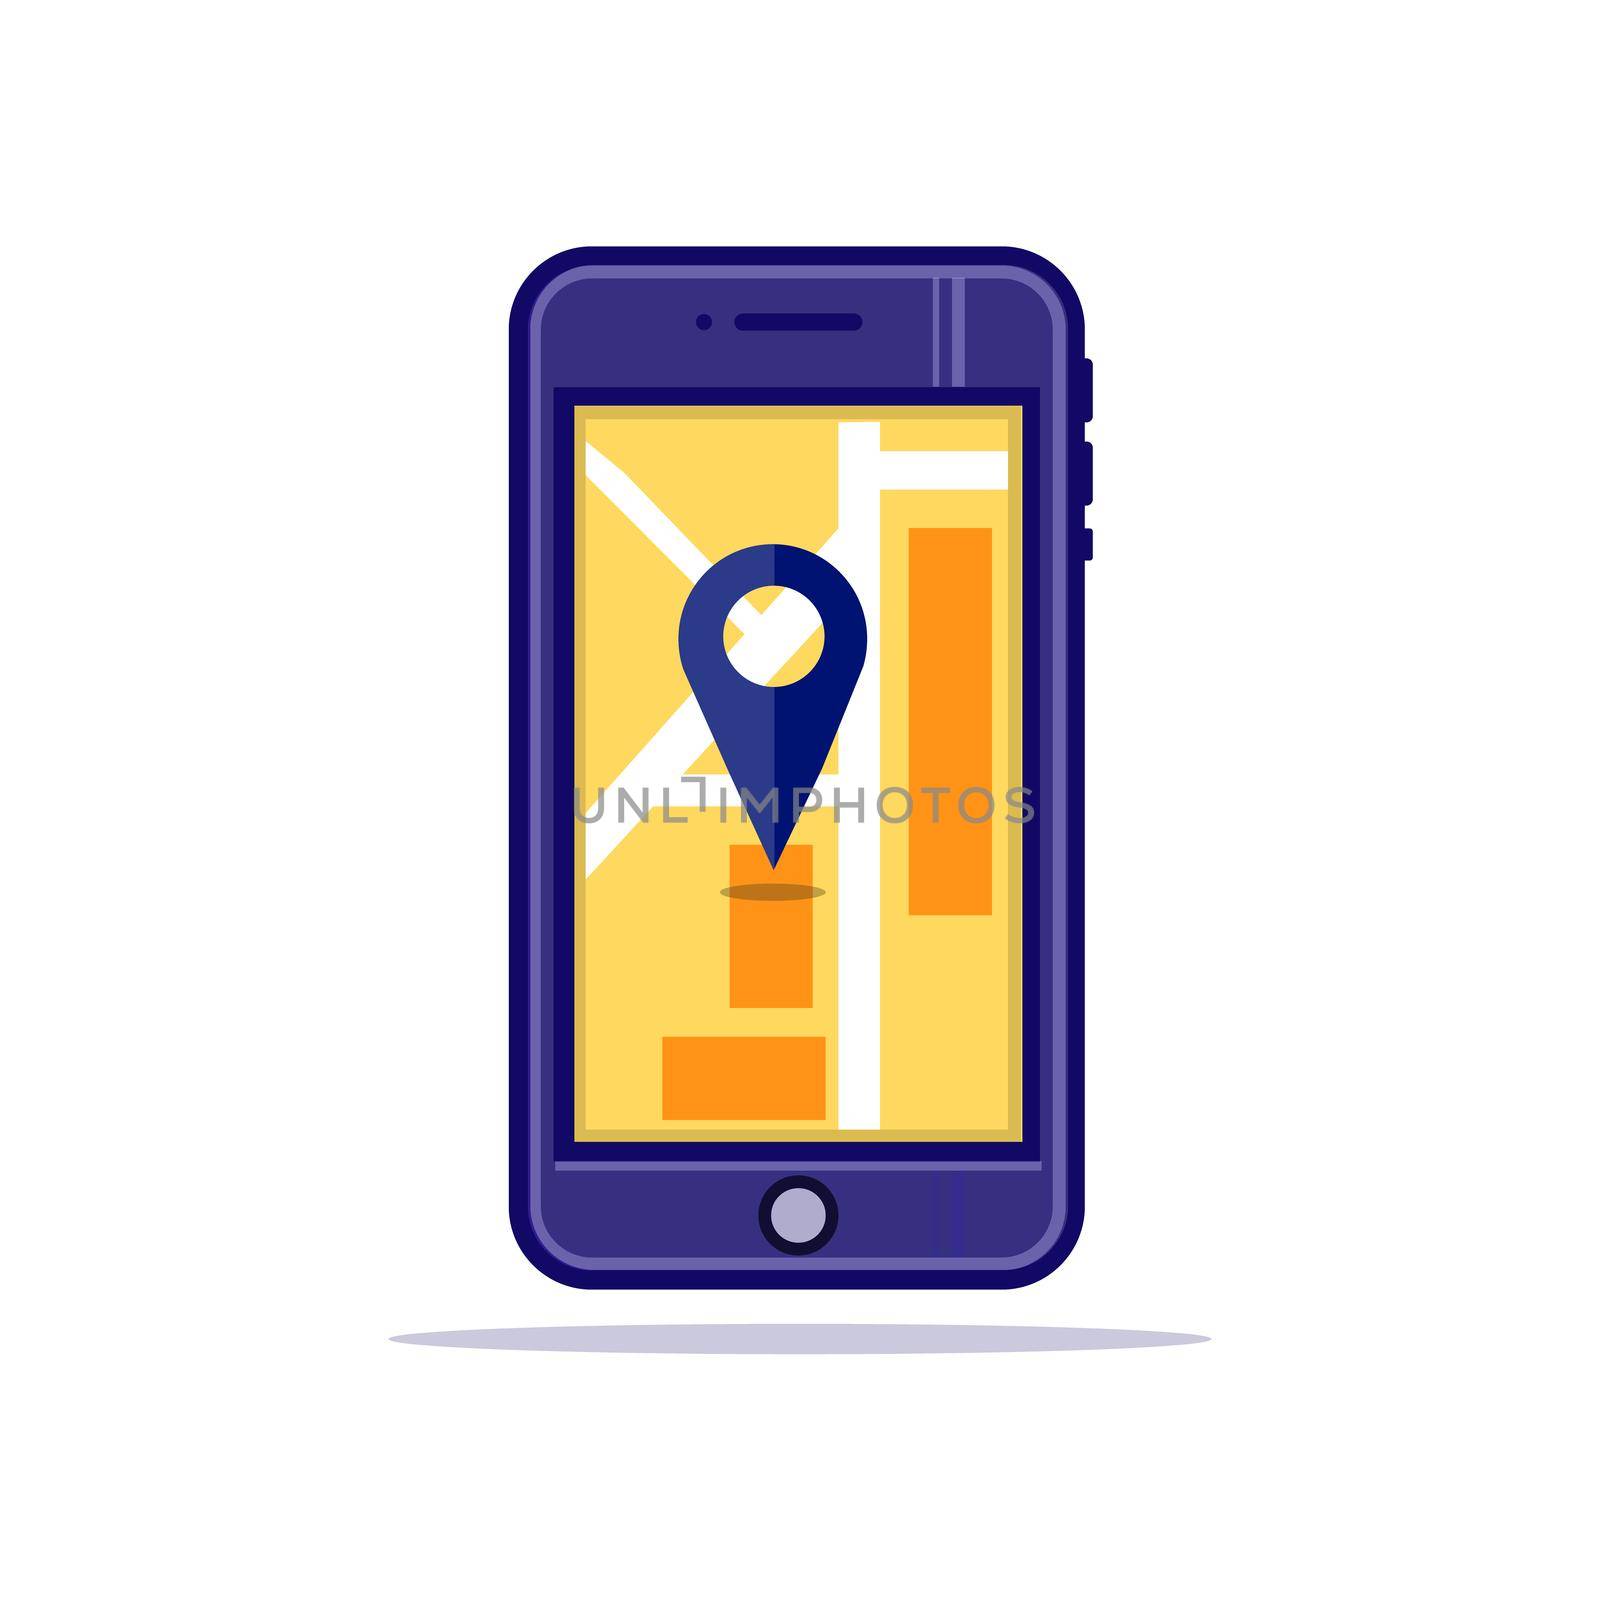 Mobile phone navigation app and gps concept with outline flat icons. illustration by Alxyzt